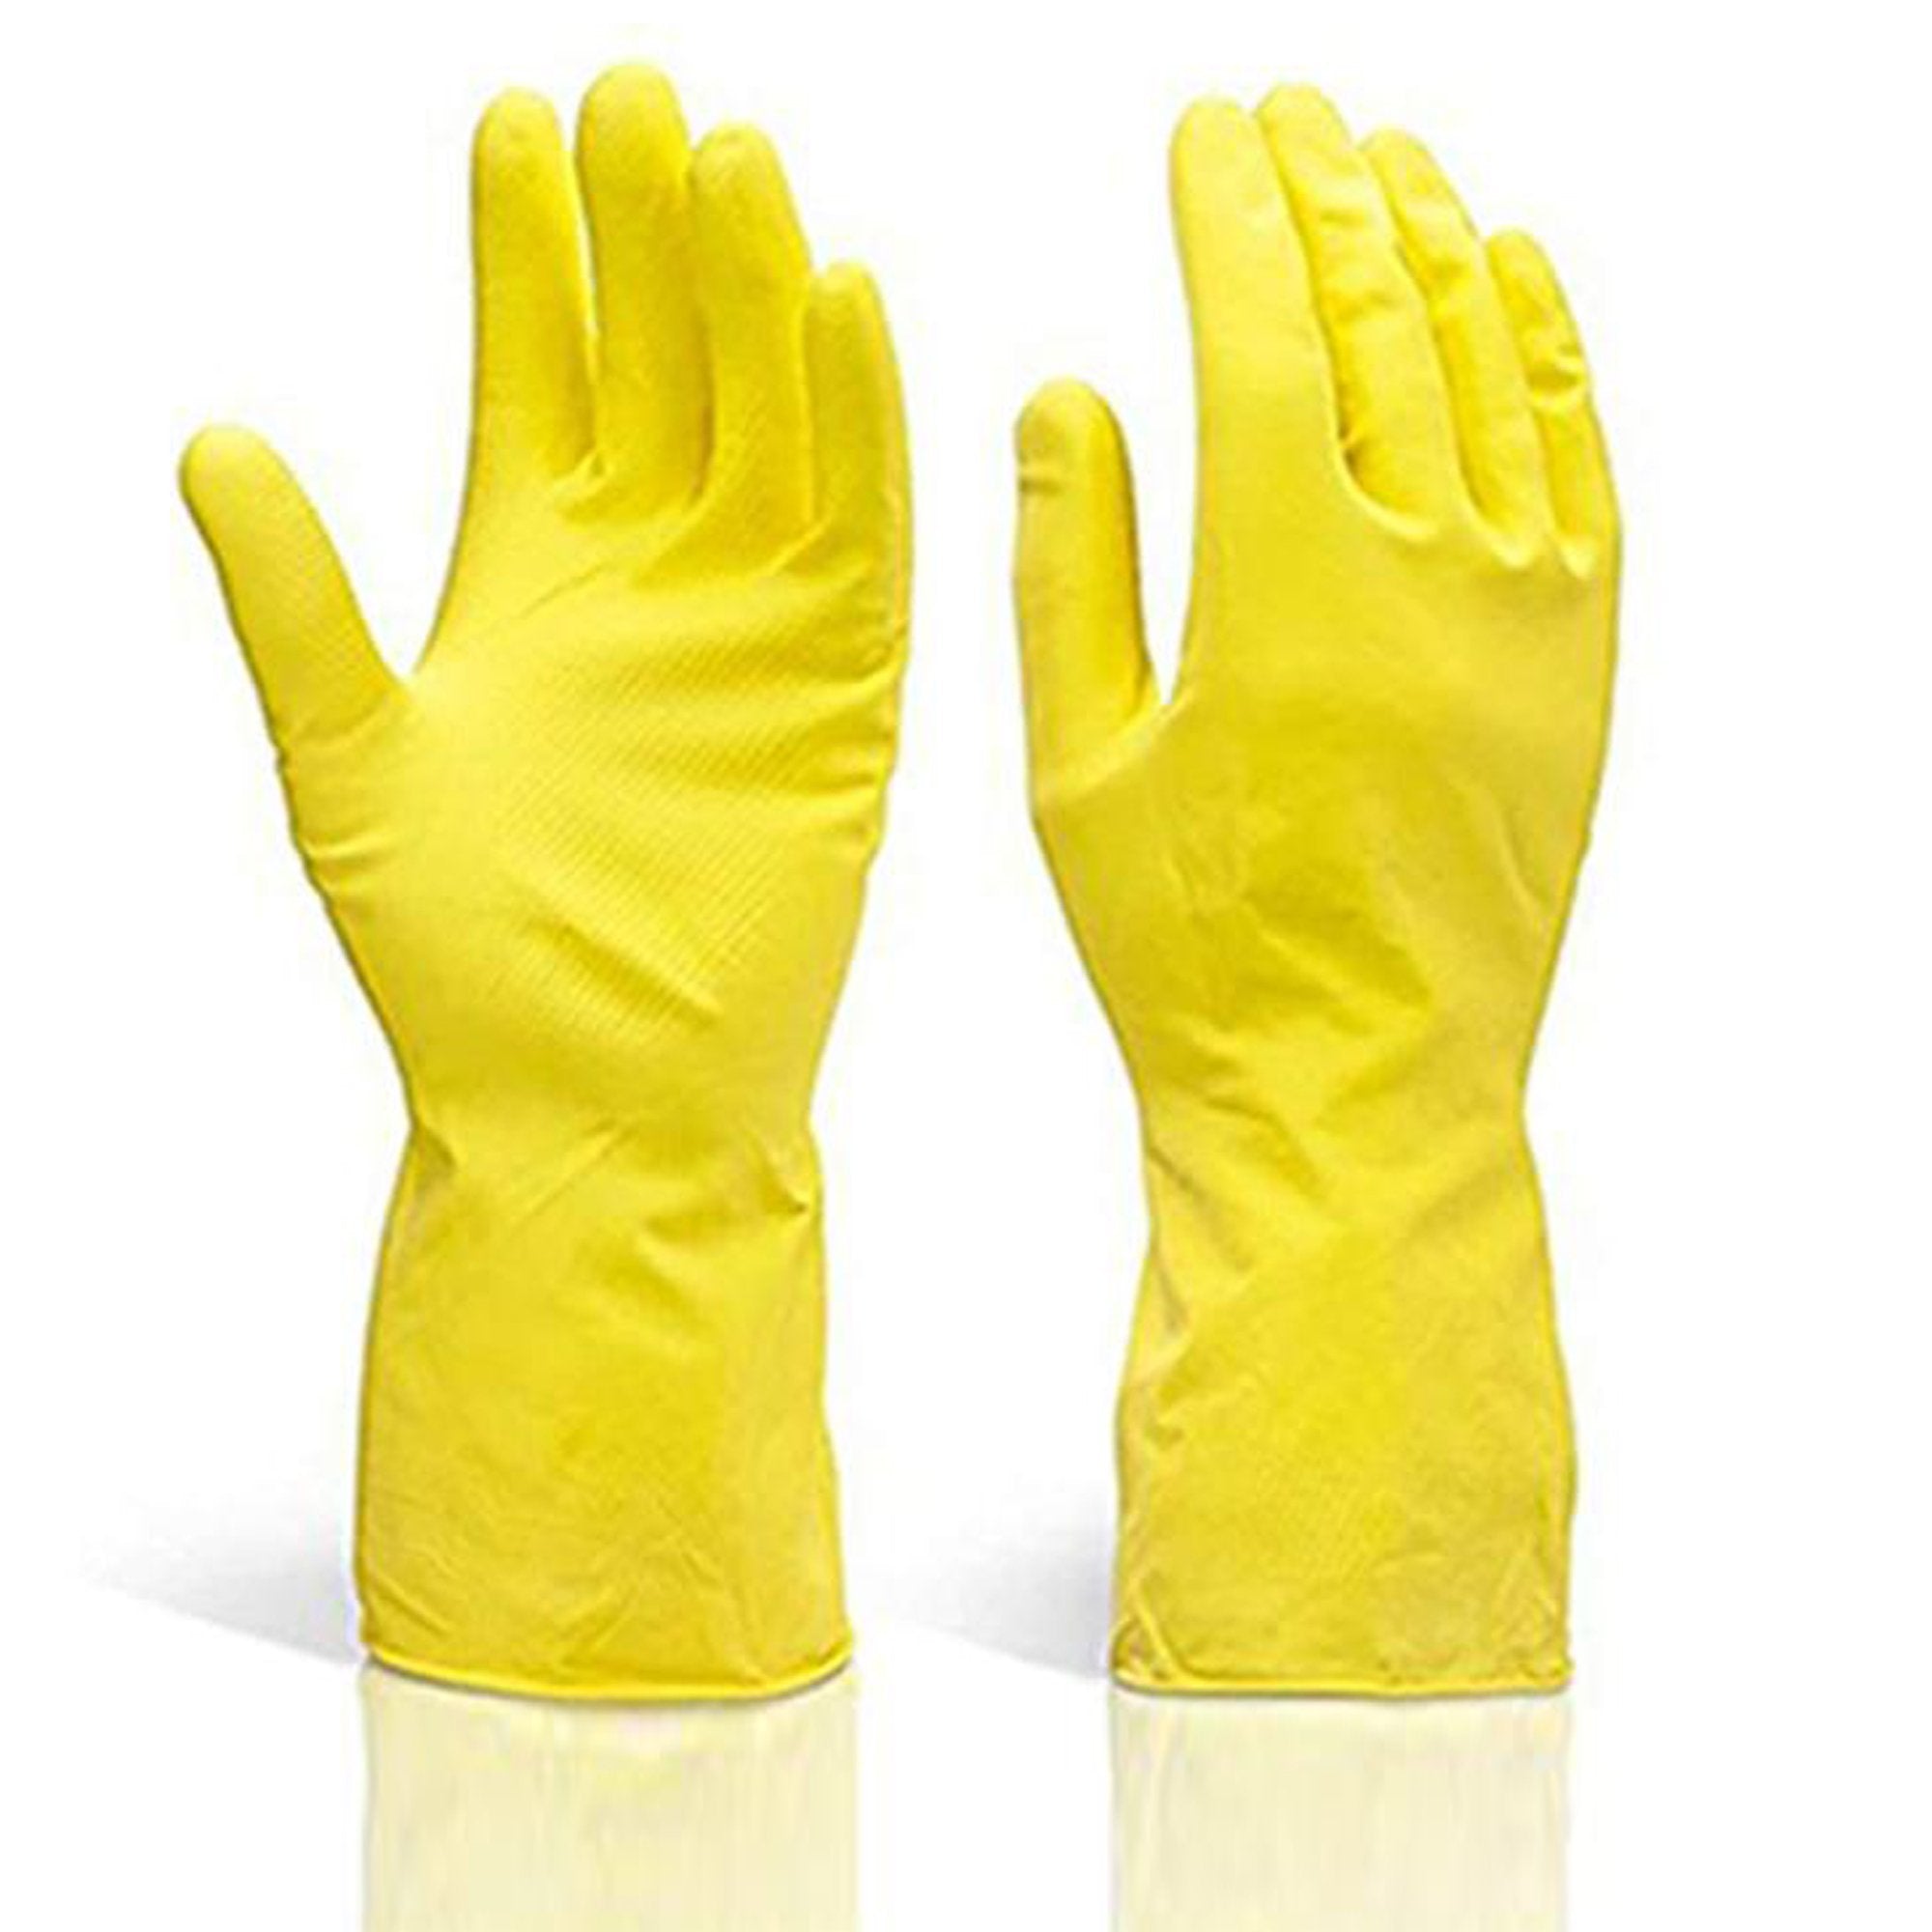 0678 Multipurpose Rubber Reusable Cleaning Gloves - SkyShopy